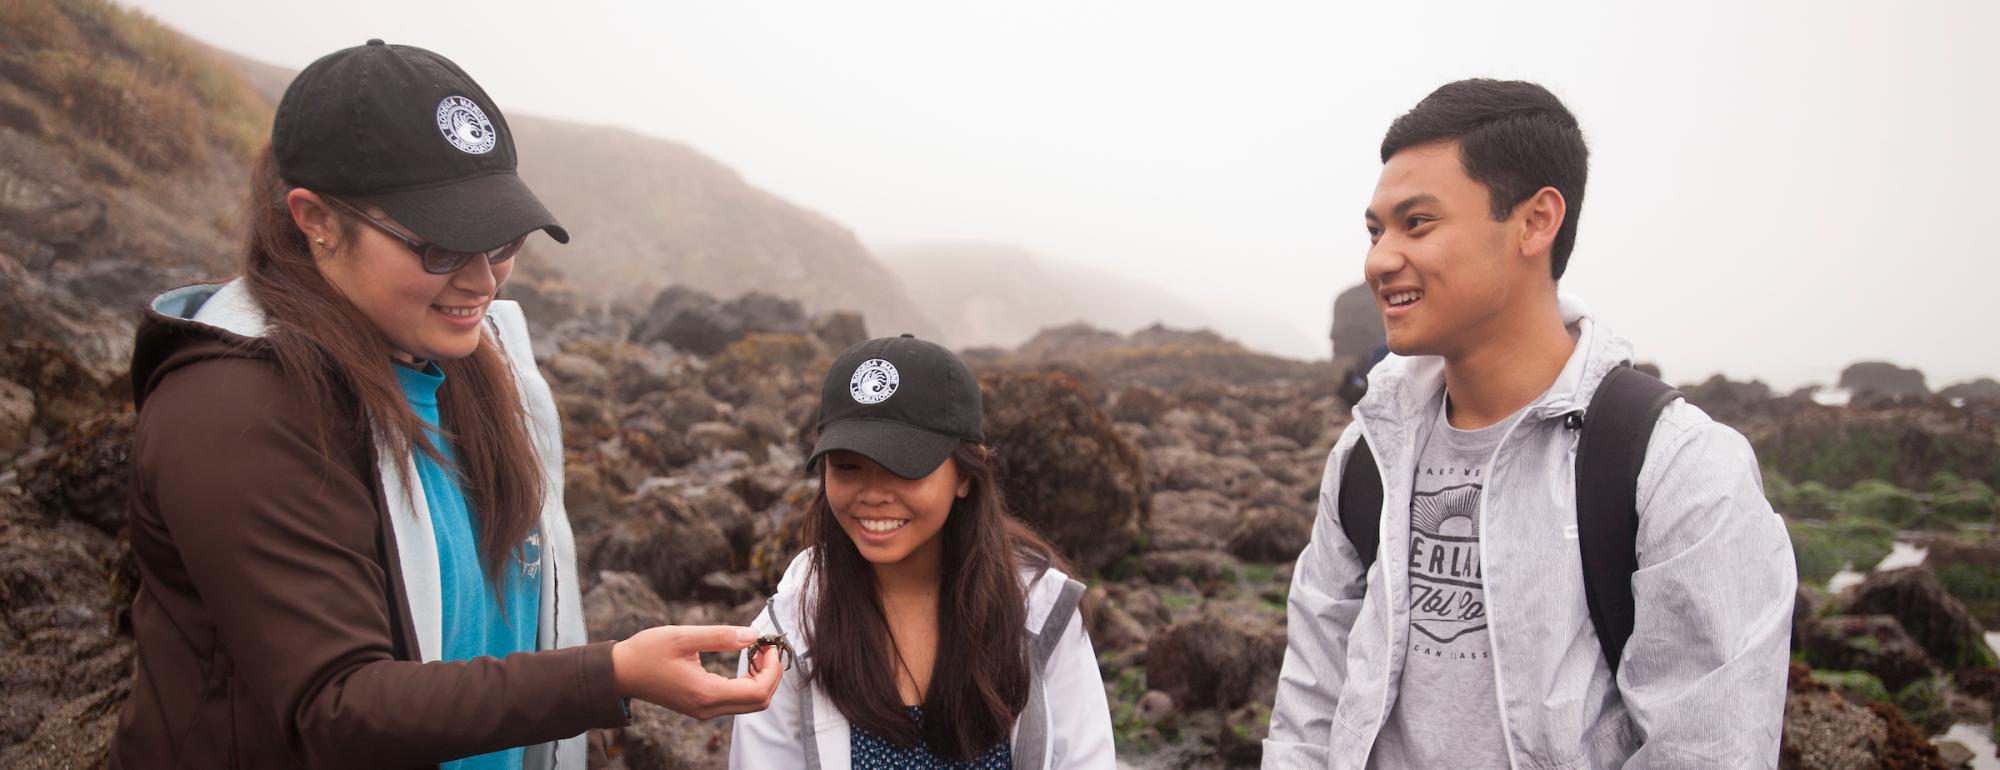 Three students, two wearing BML black baseball caps, stand in a tidepool looking at a small crab being held by one of the students